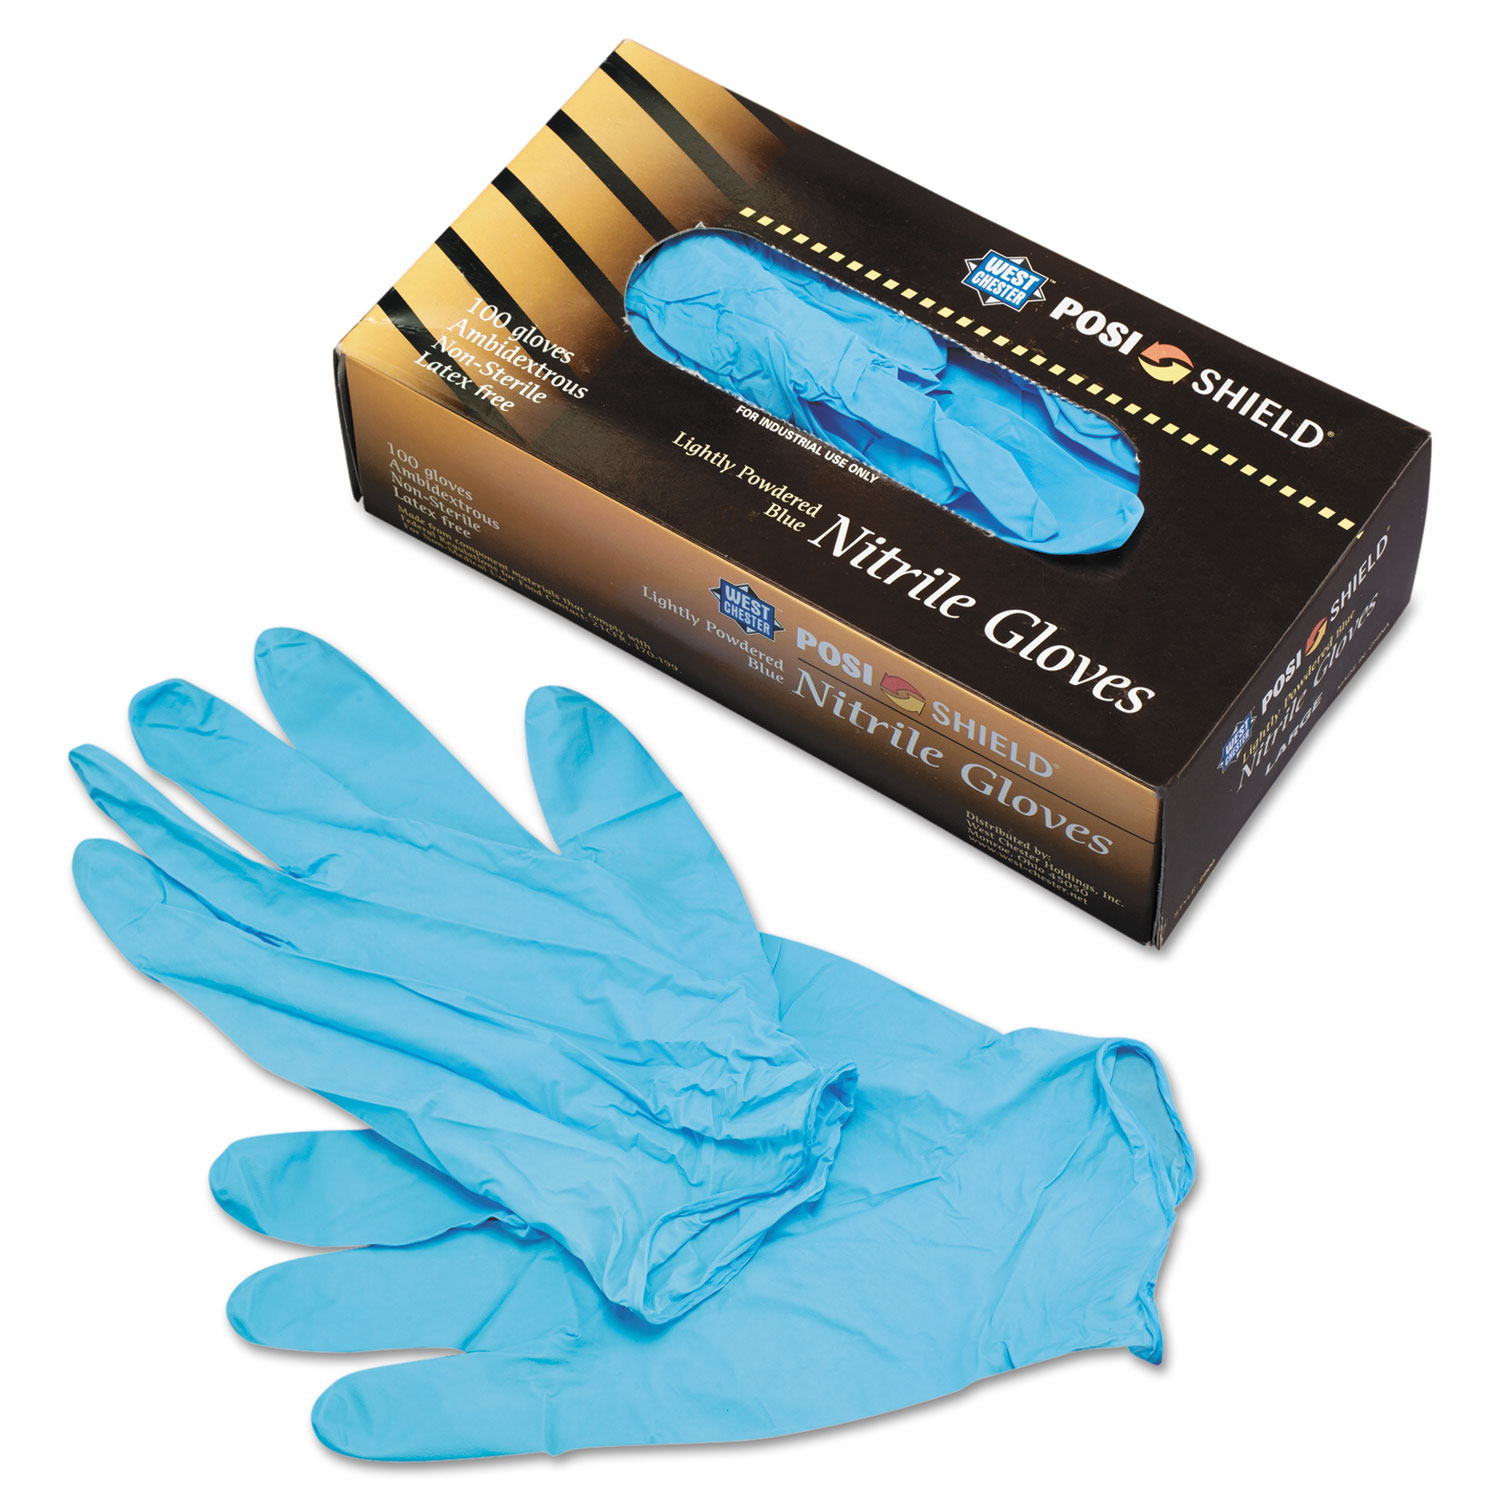  West Chester 2900/L Industrial Grade Nitrile Disposable Gloves, Powdered, Large, 100/Box (WCH2900L) 